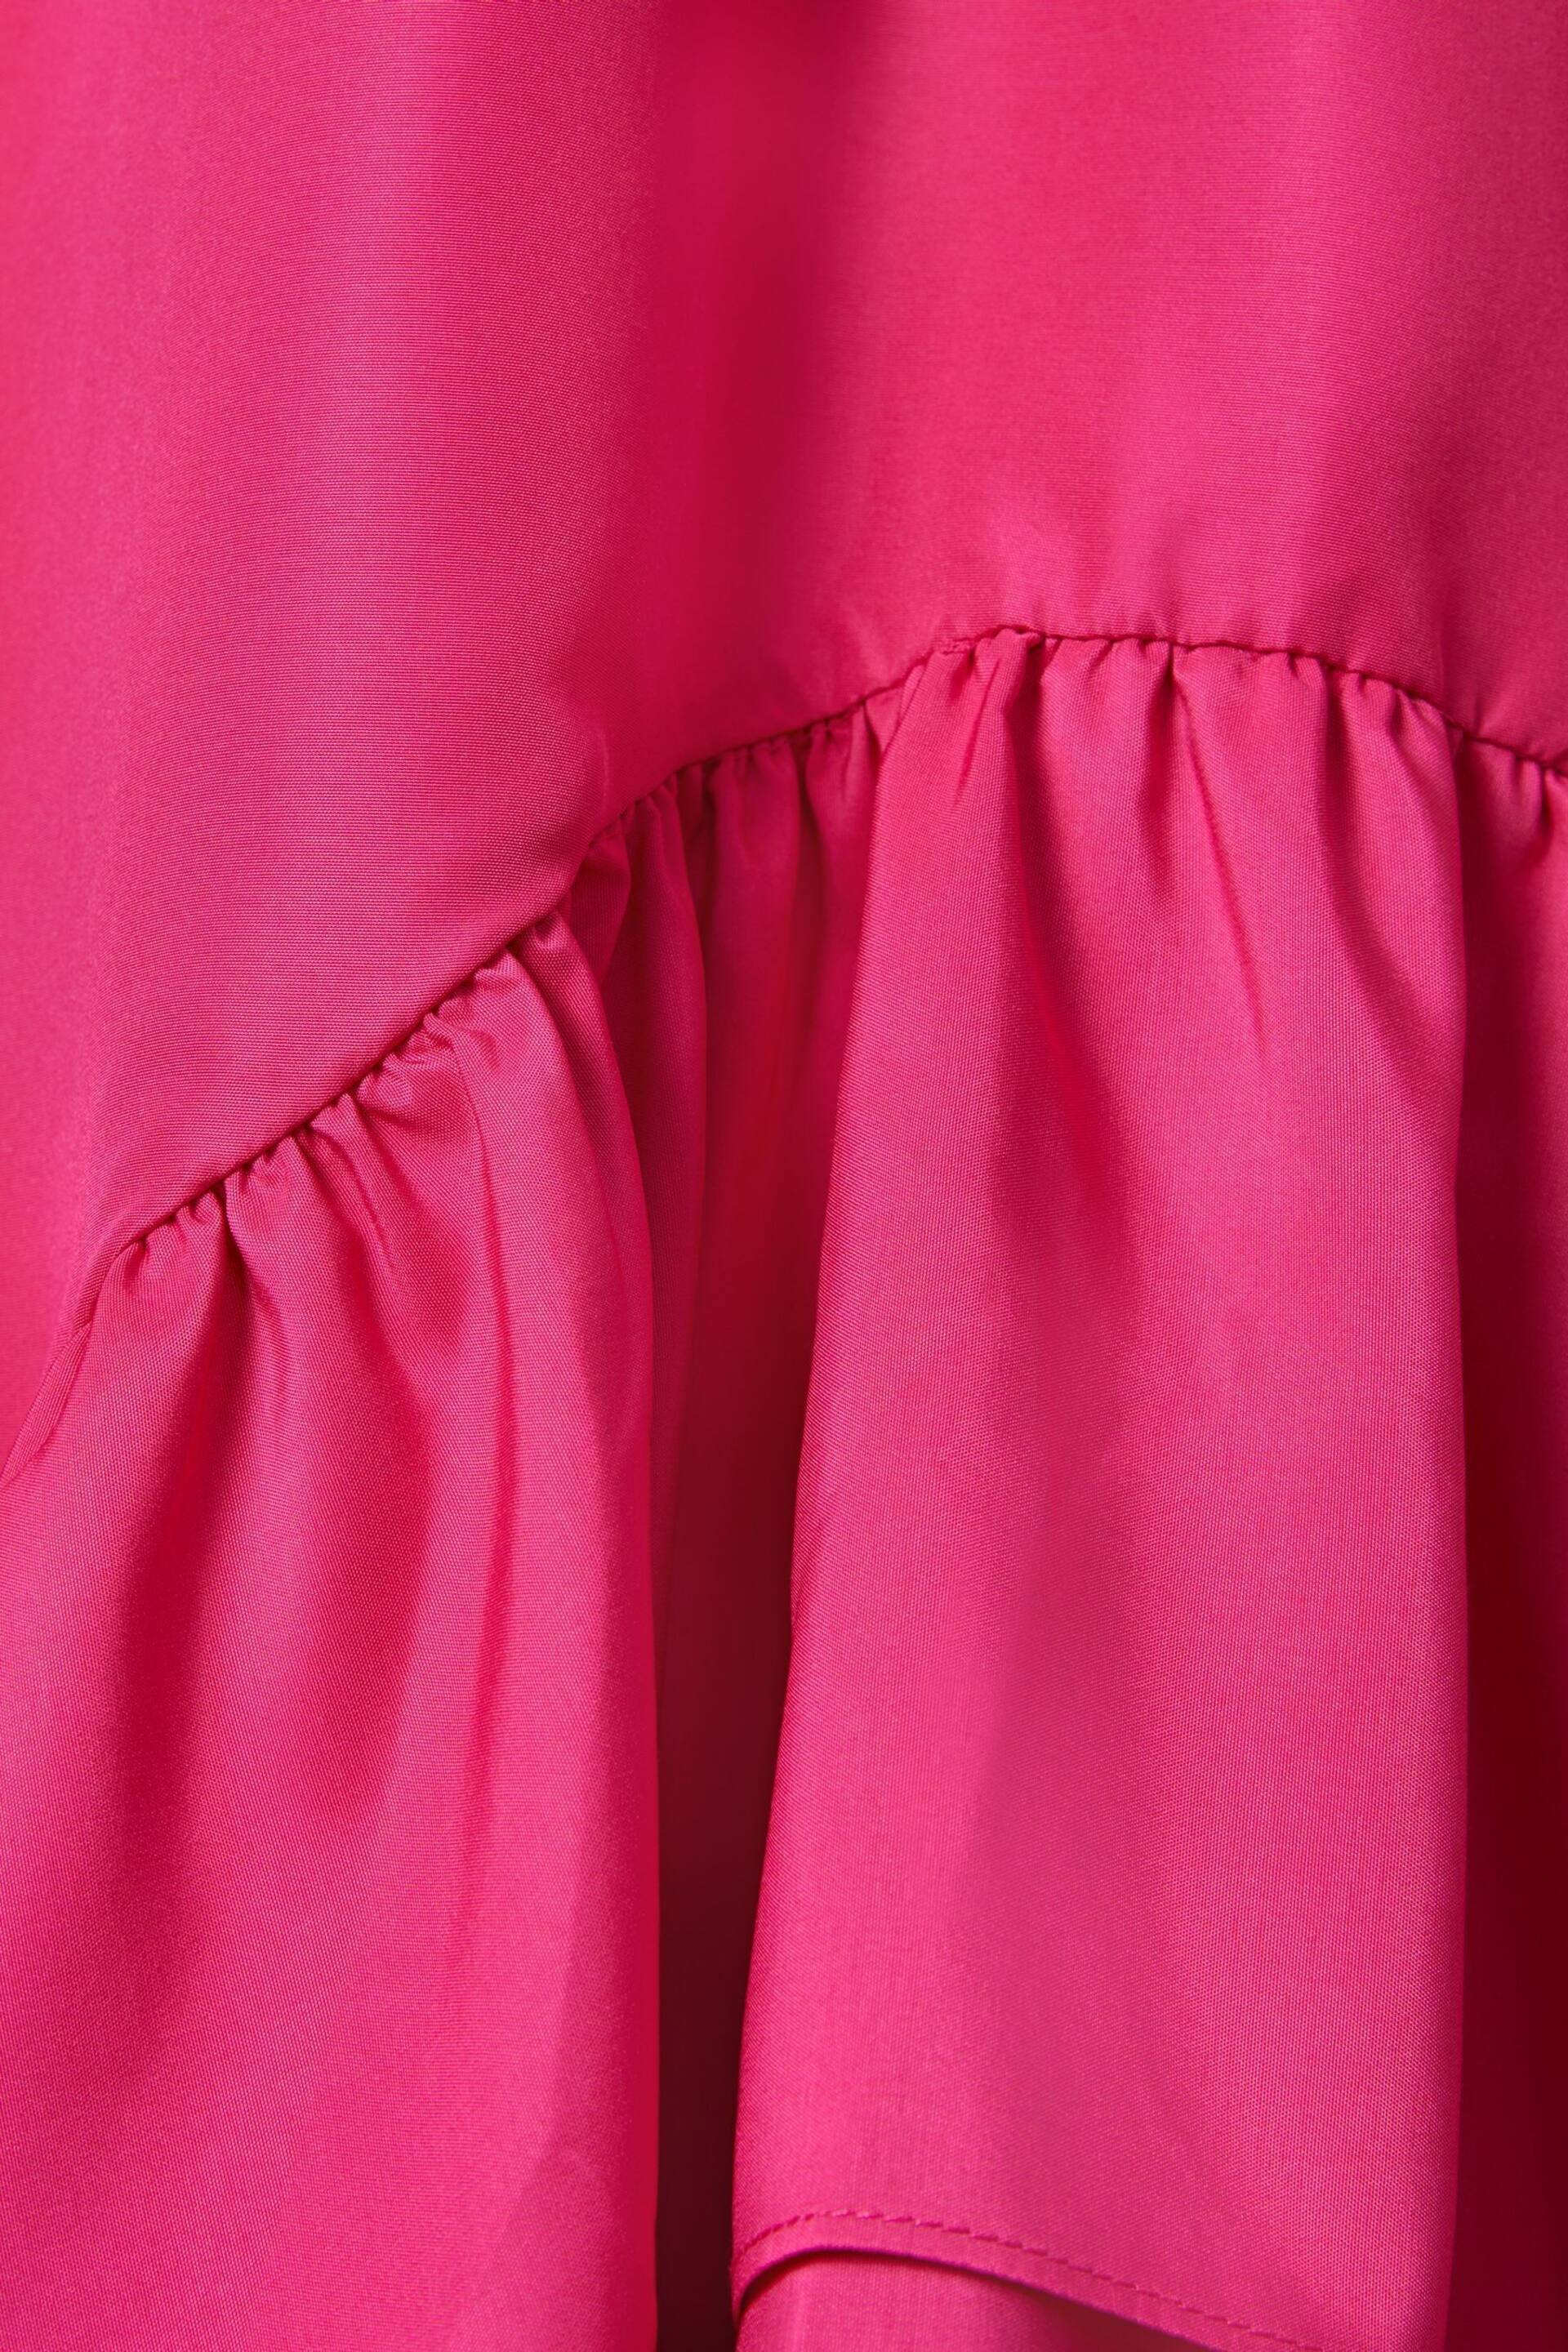 Reiss Bright Pink Cherie Junior Layered High-Low Dress - Image 7 of 7